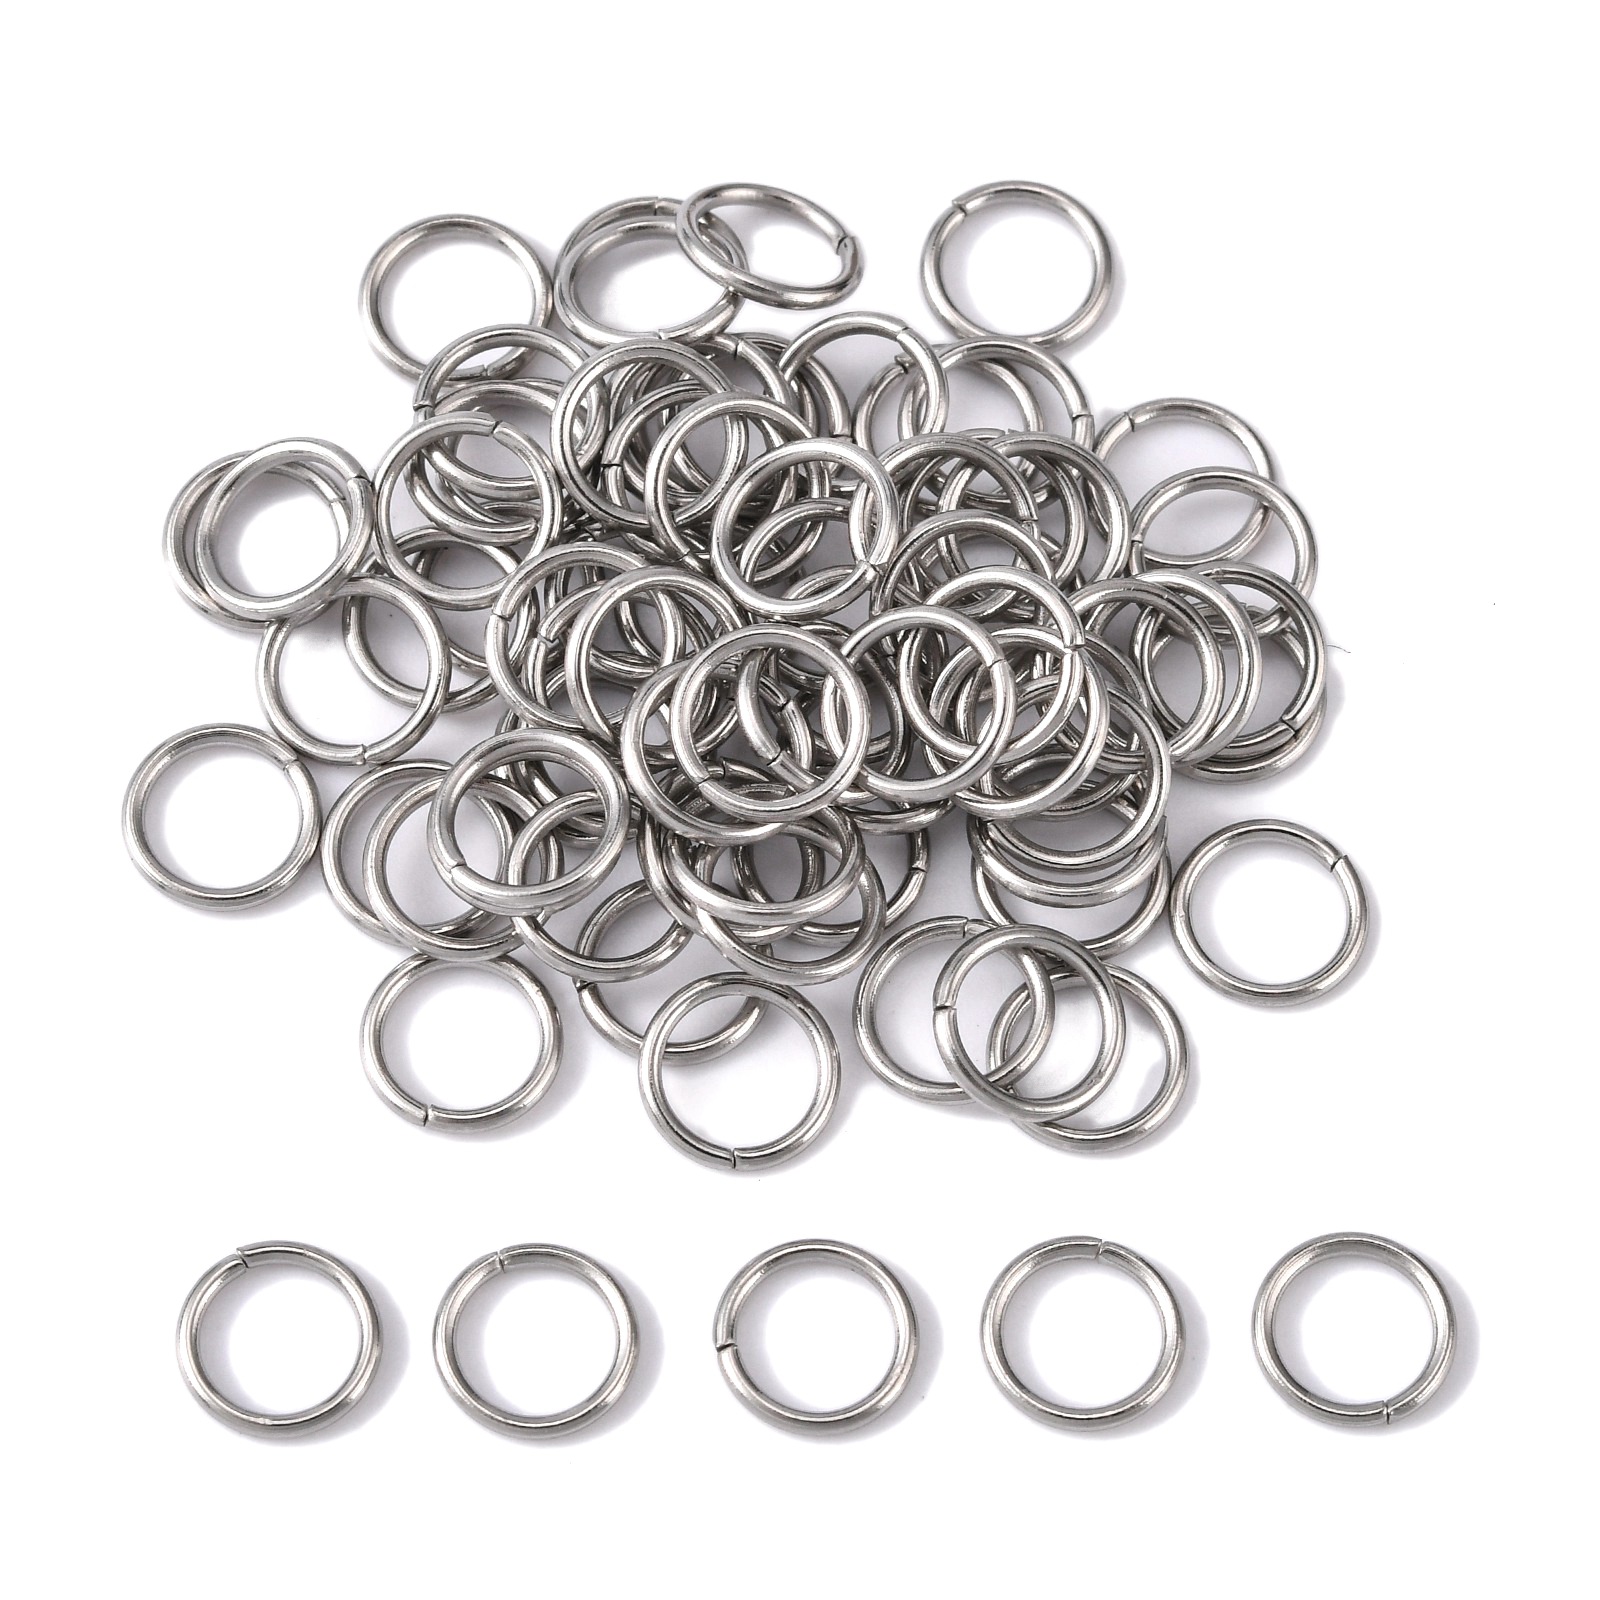 100Pcs/Lot Stainless Steel Open Jump Ring 4/5/6/8mm Dia Round Gold